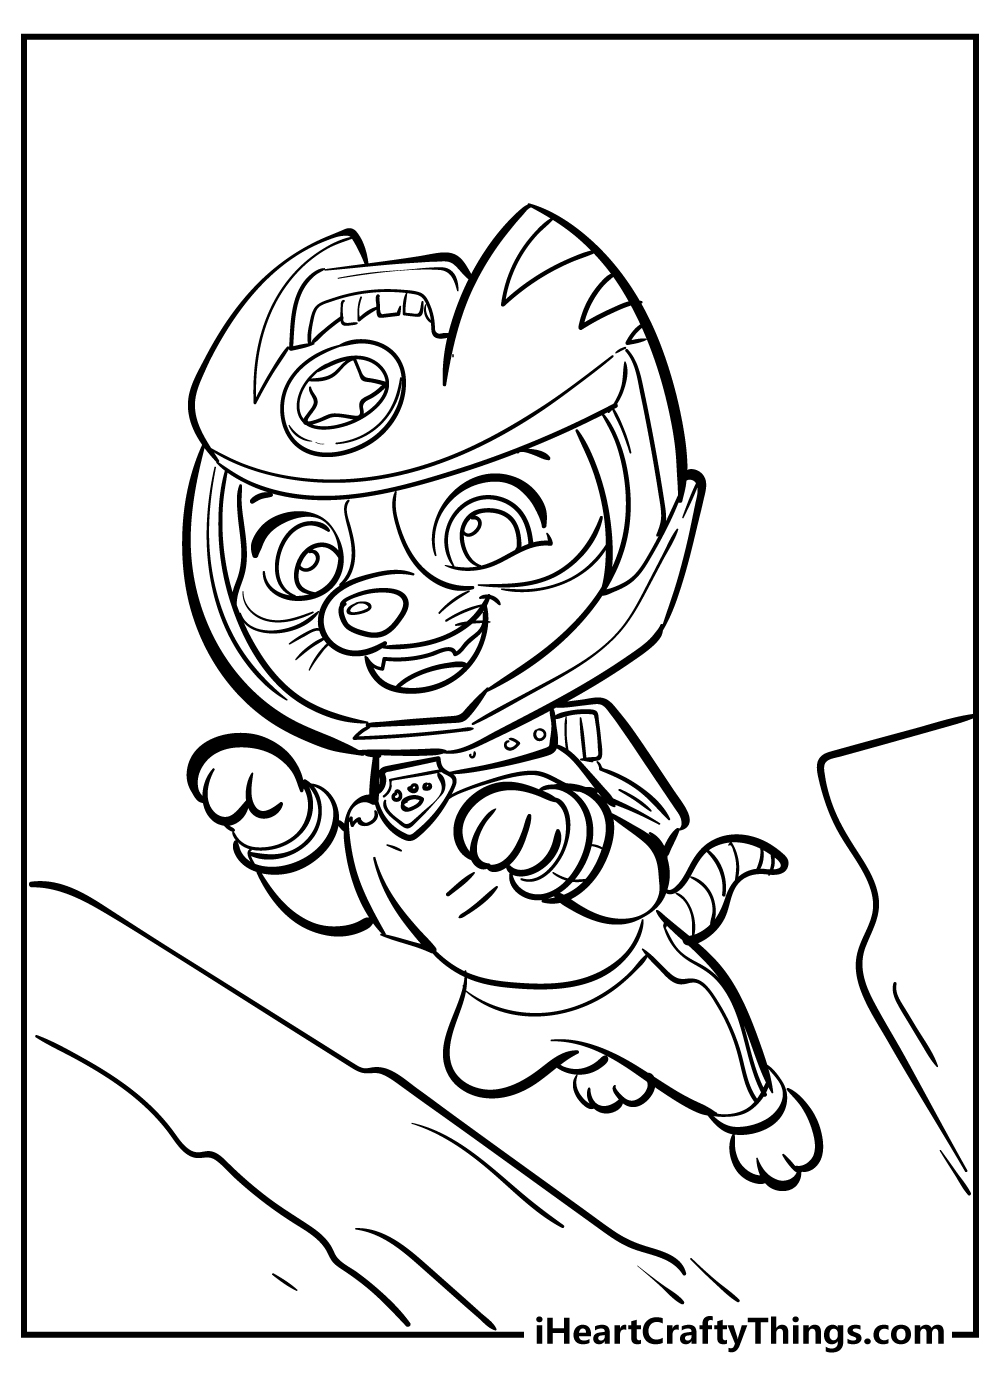 Ryder Paw Patrol Coloring Pages - Coloring Home